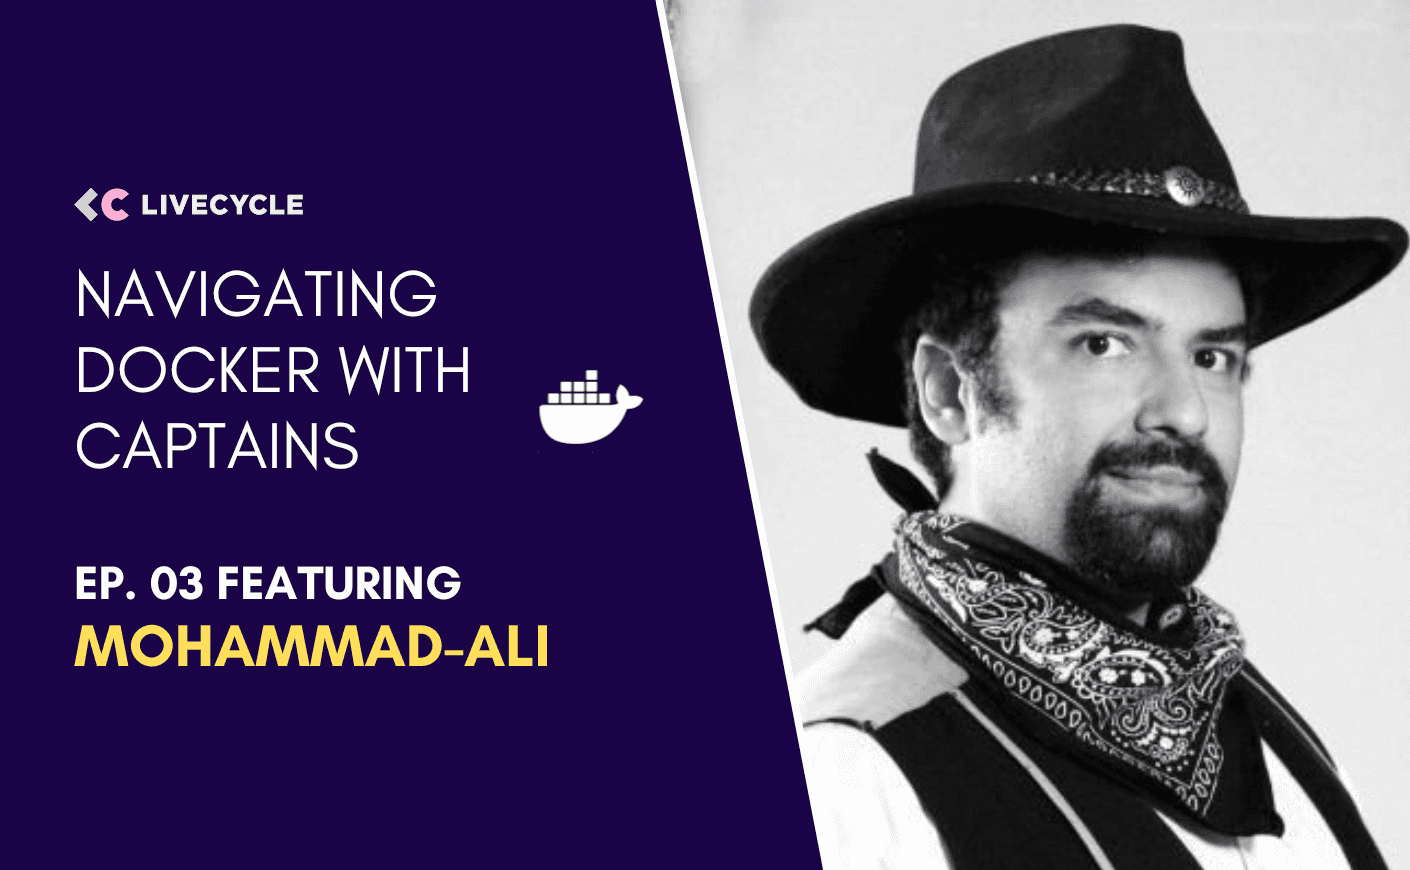 Navigating Docker With Captains Ep. 03 with Mohammad Ali